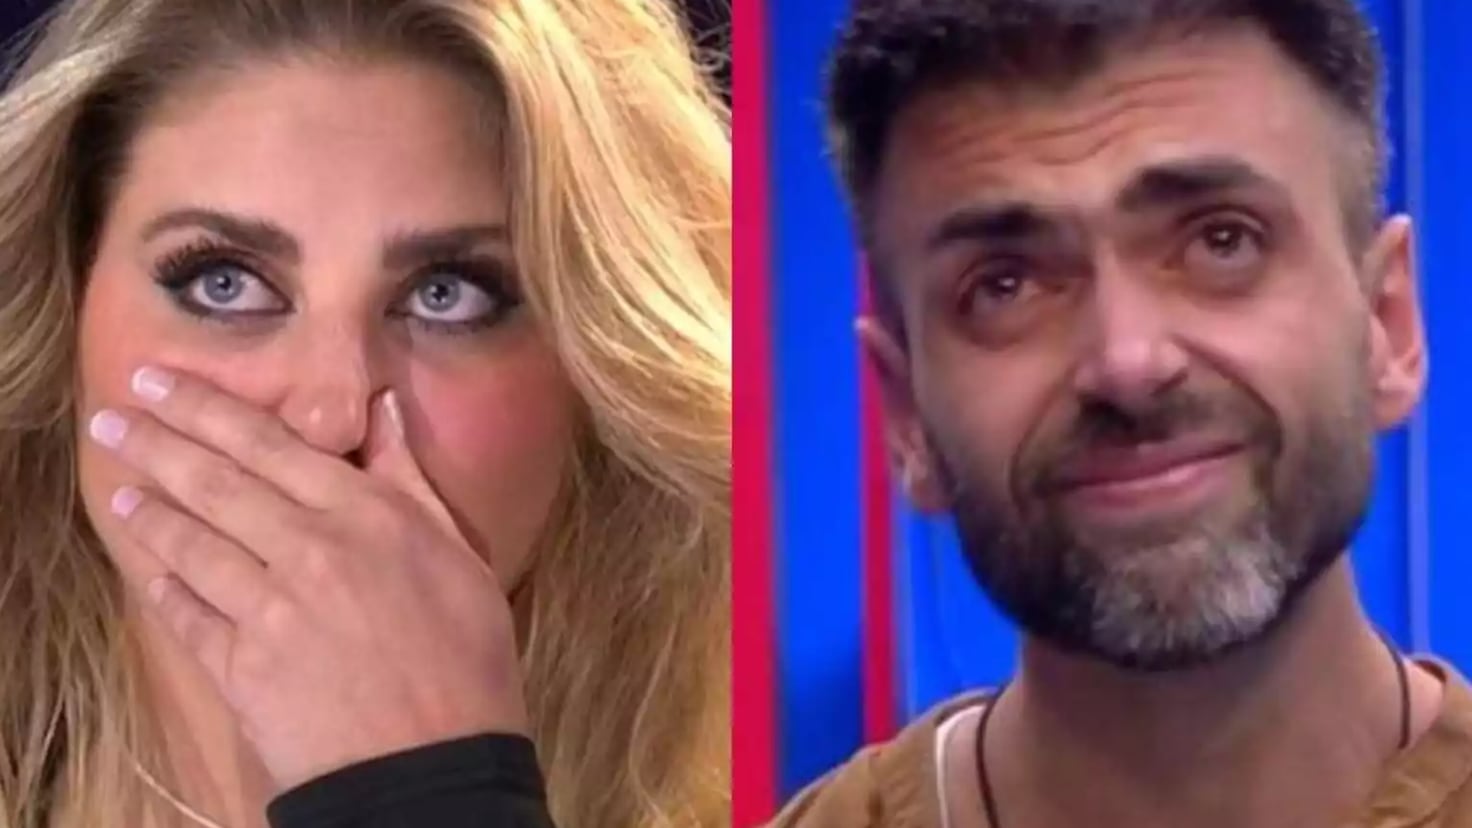 Zeus Tous breaks up with Susana Bianca: I made the decision
